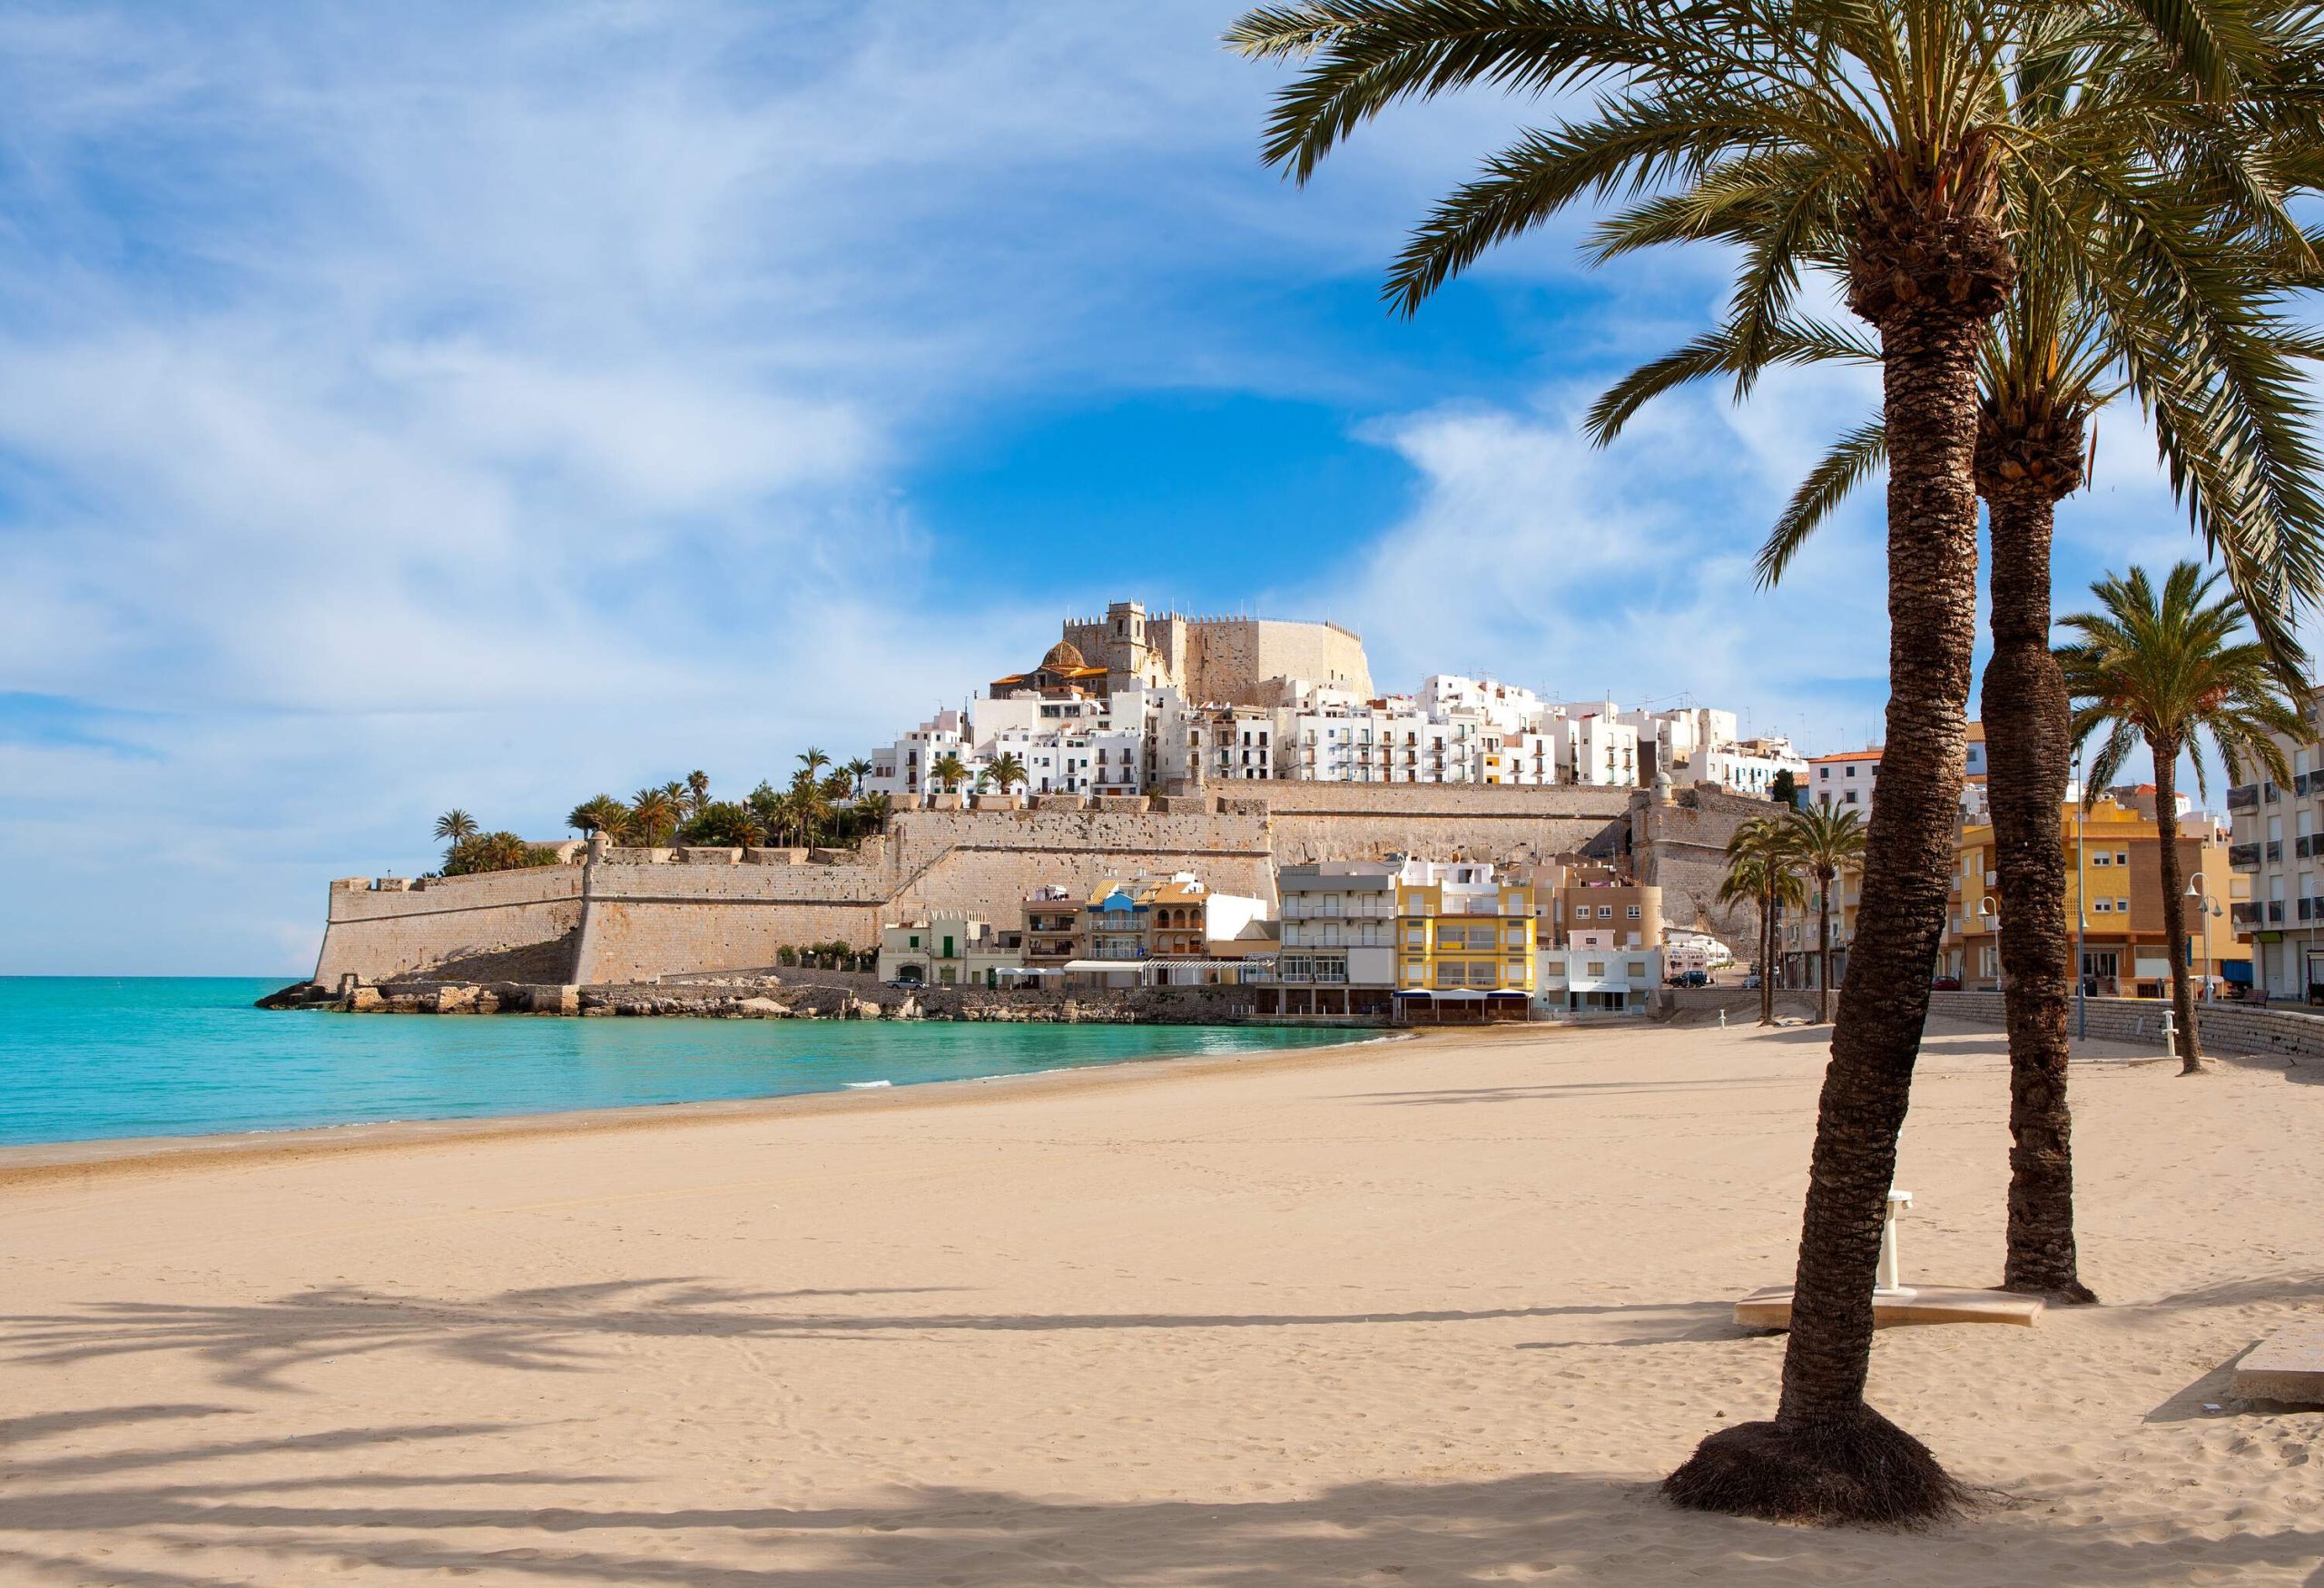 A castle surrounded by white houses on top of a crag overlooking a white sand beach with calm turquoise water.